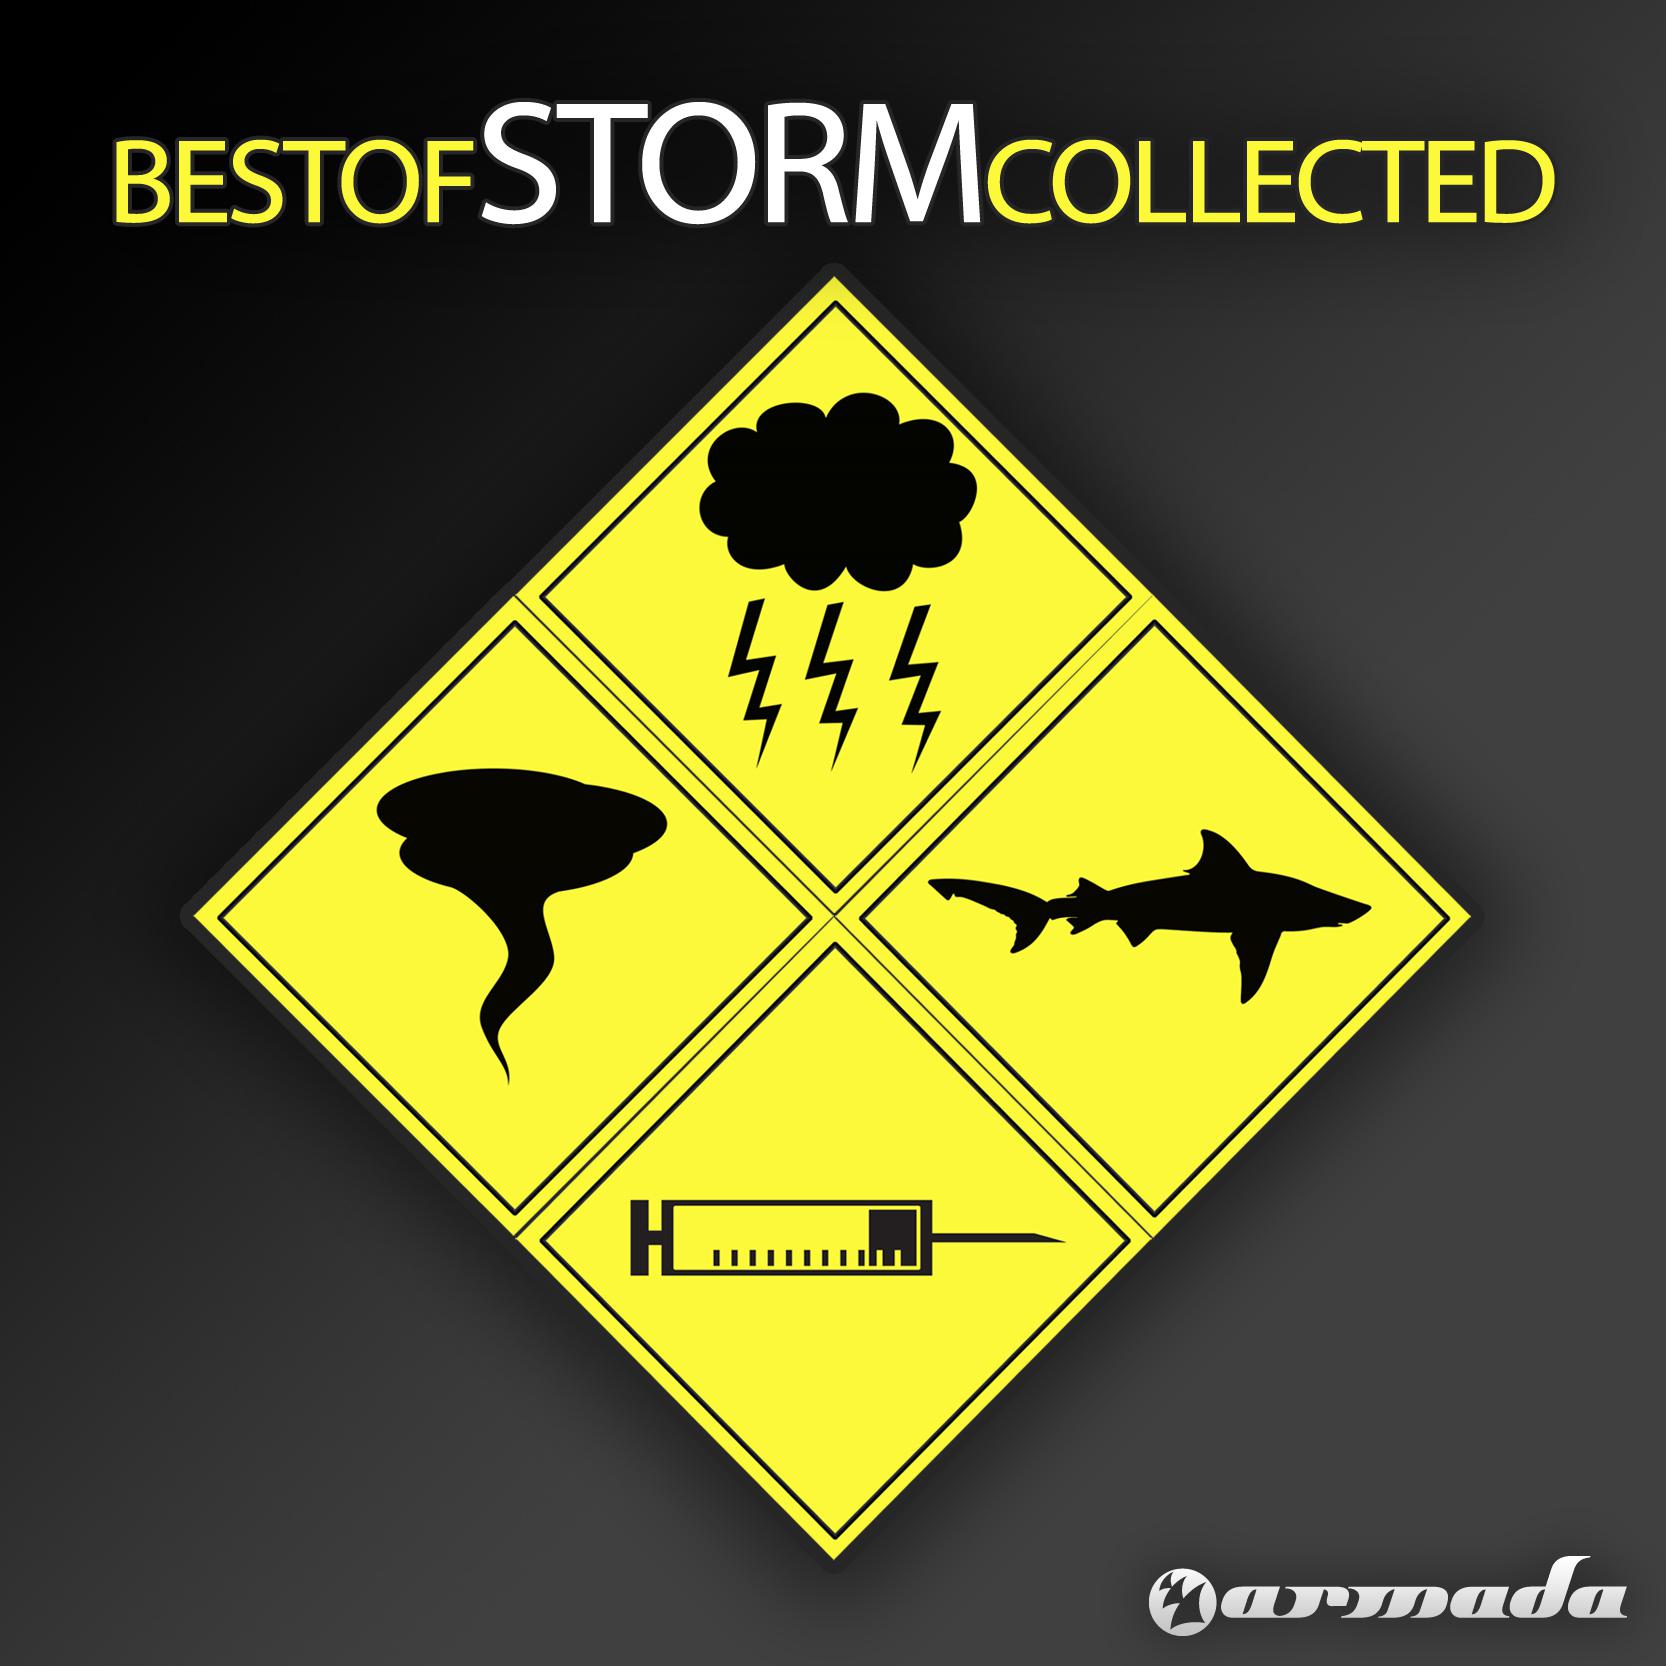 Best of Storm Collected